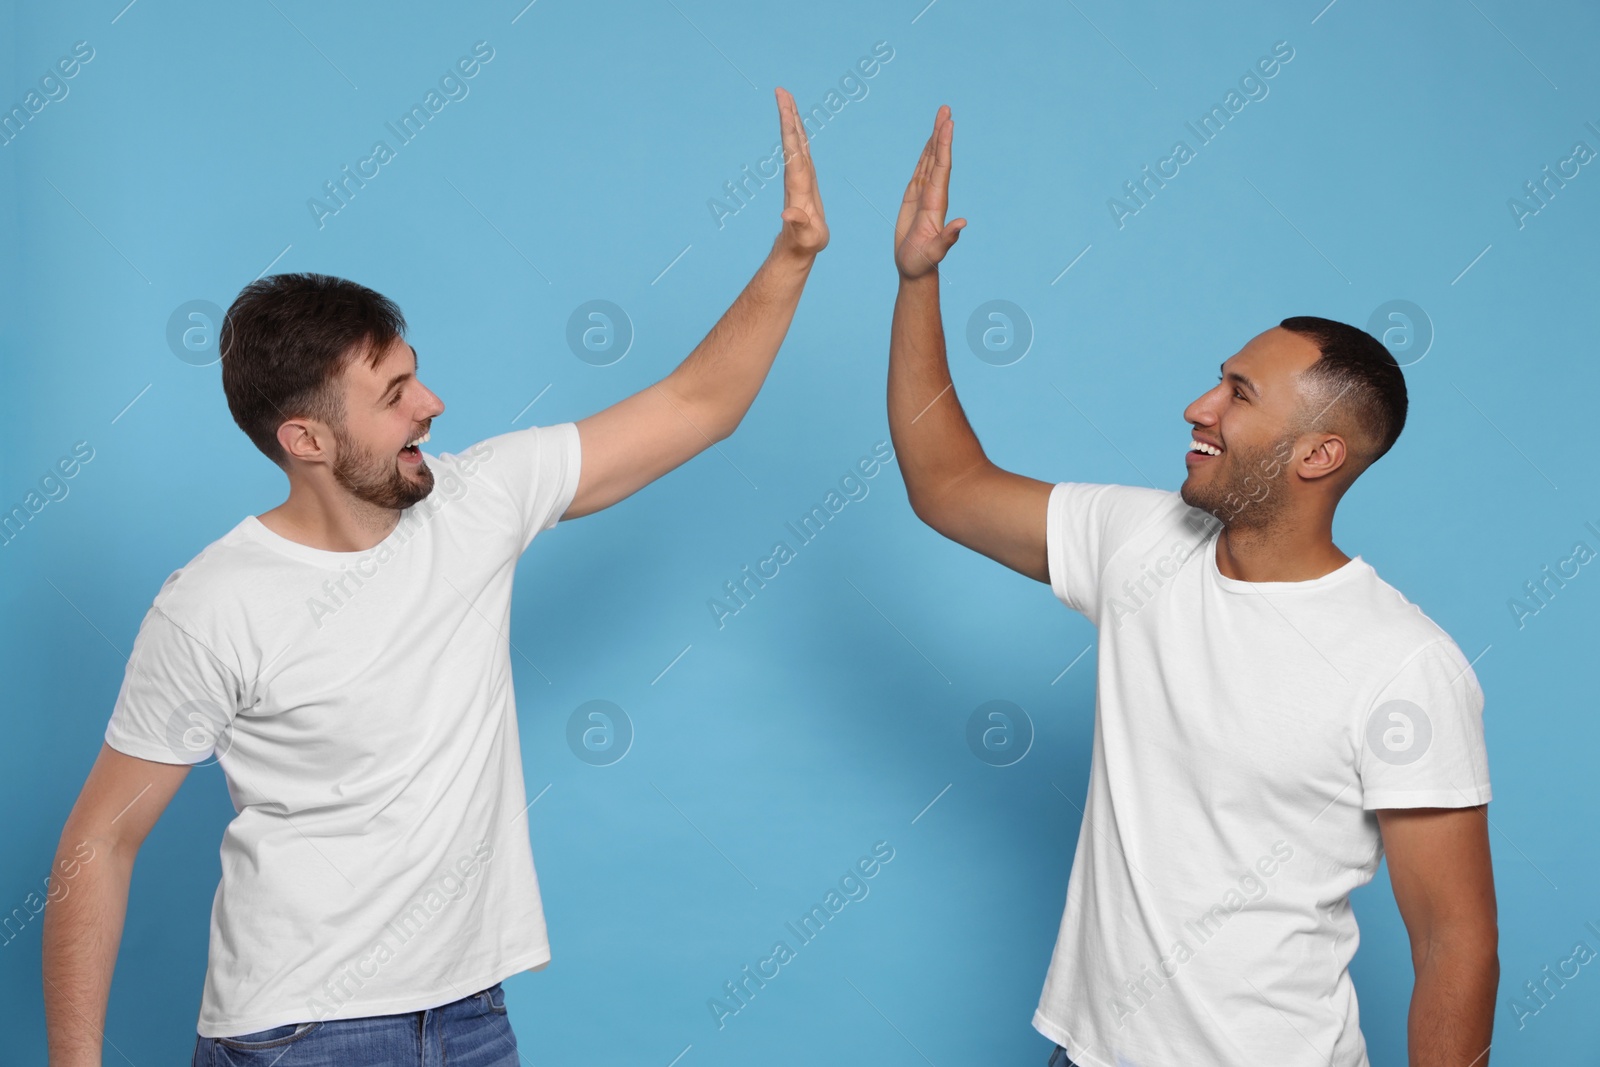 Photo of Men giving high five on light blue background